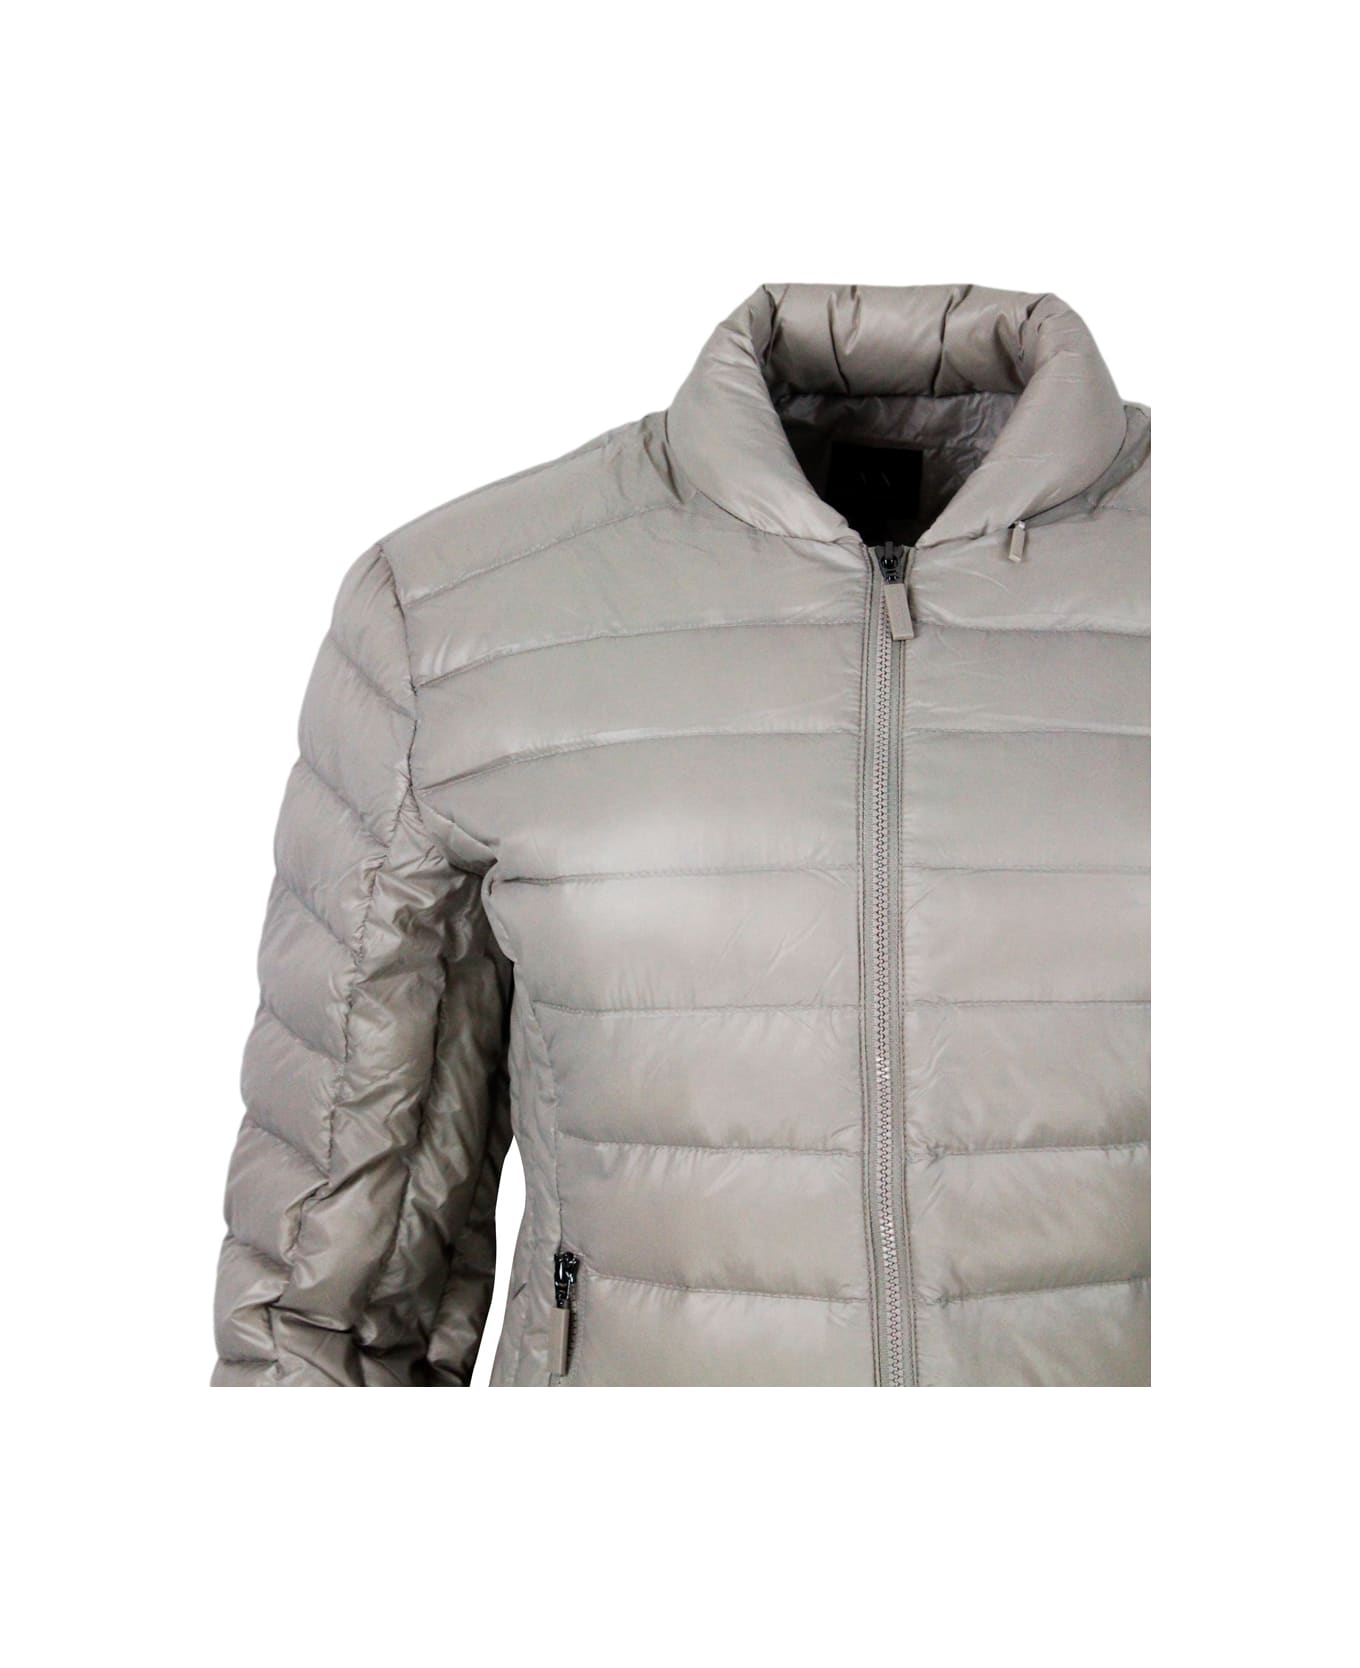 Armani Collezioni Lightweight 100 Gram Slim Down Jacket With Integrated Concealed Hood And Zip Closure - Beige